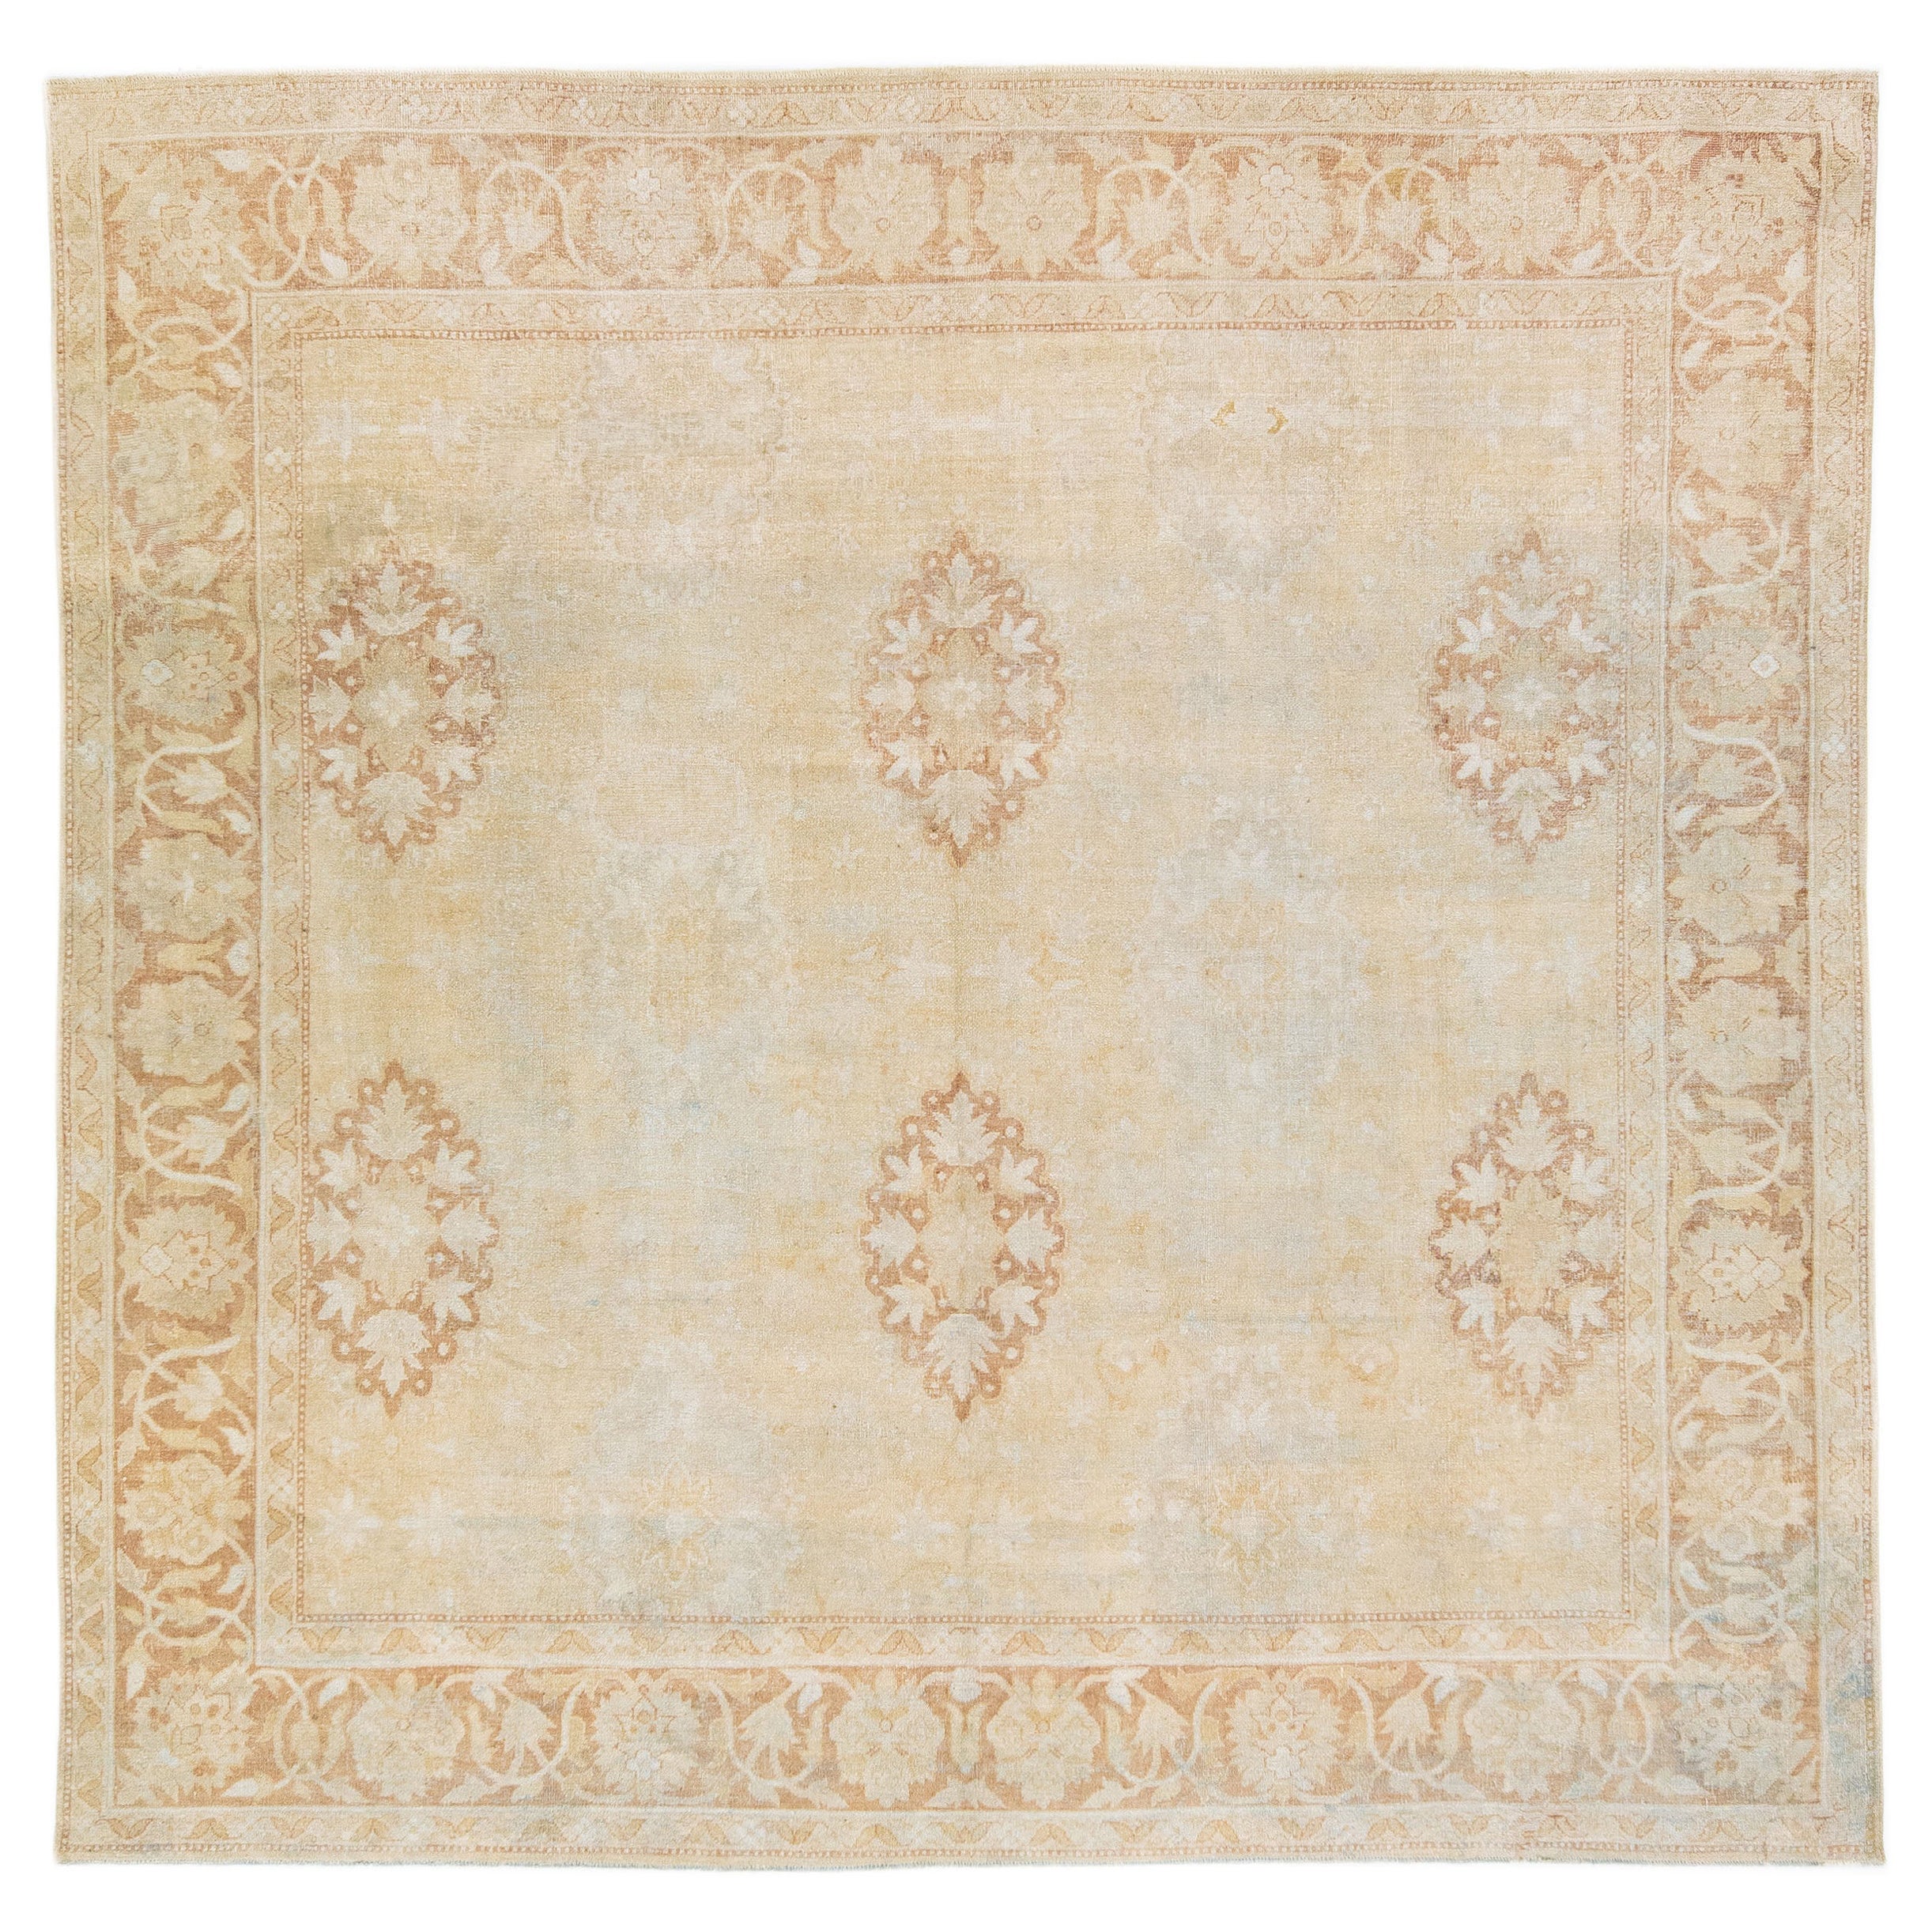 Beige Antique Indian Agra Handmade Square Wool Rug with Allover Motif